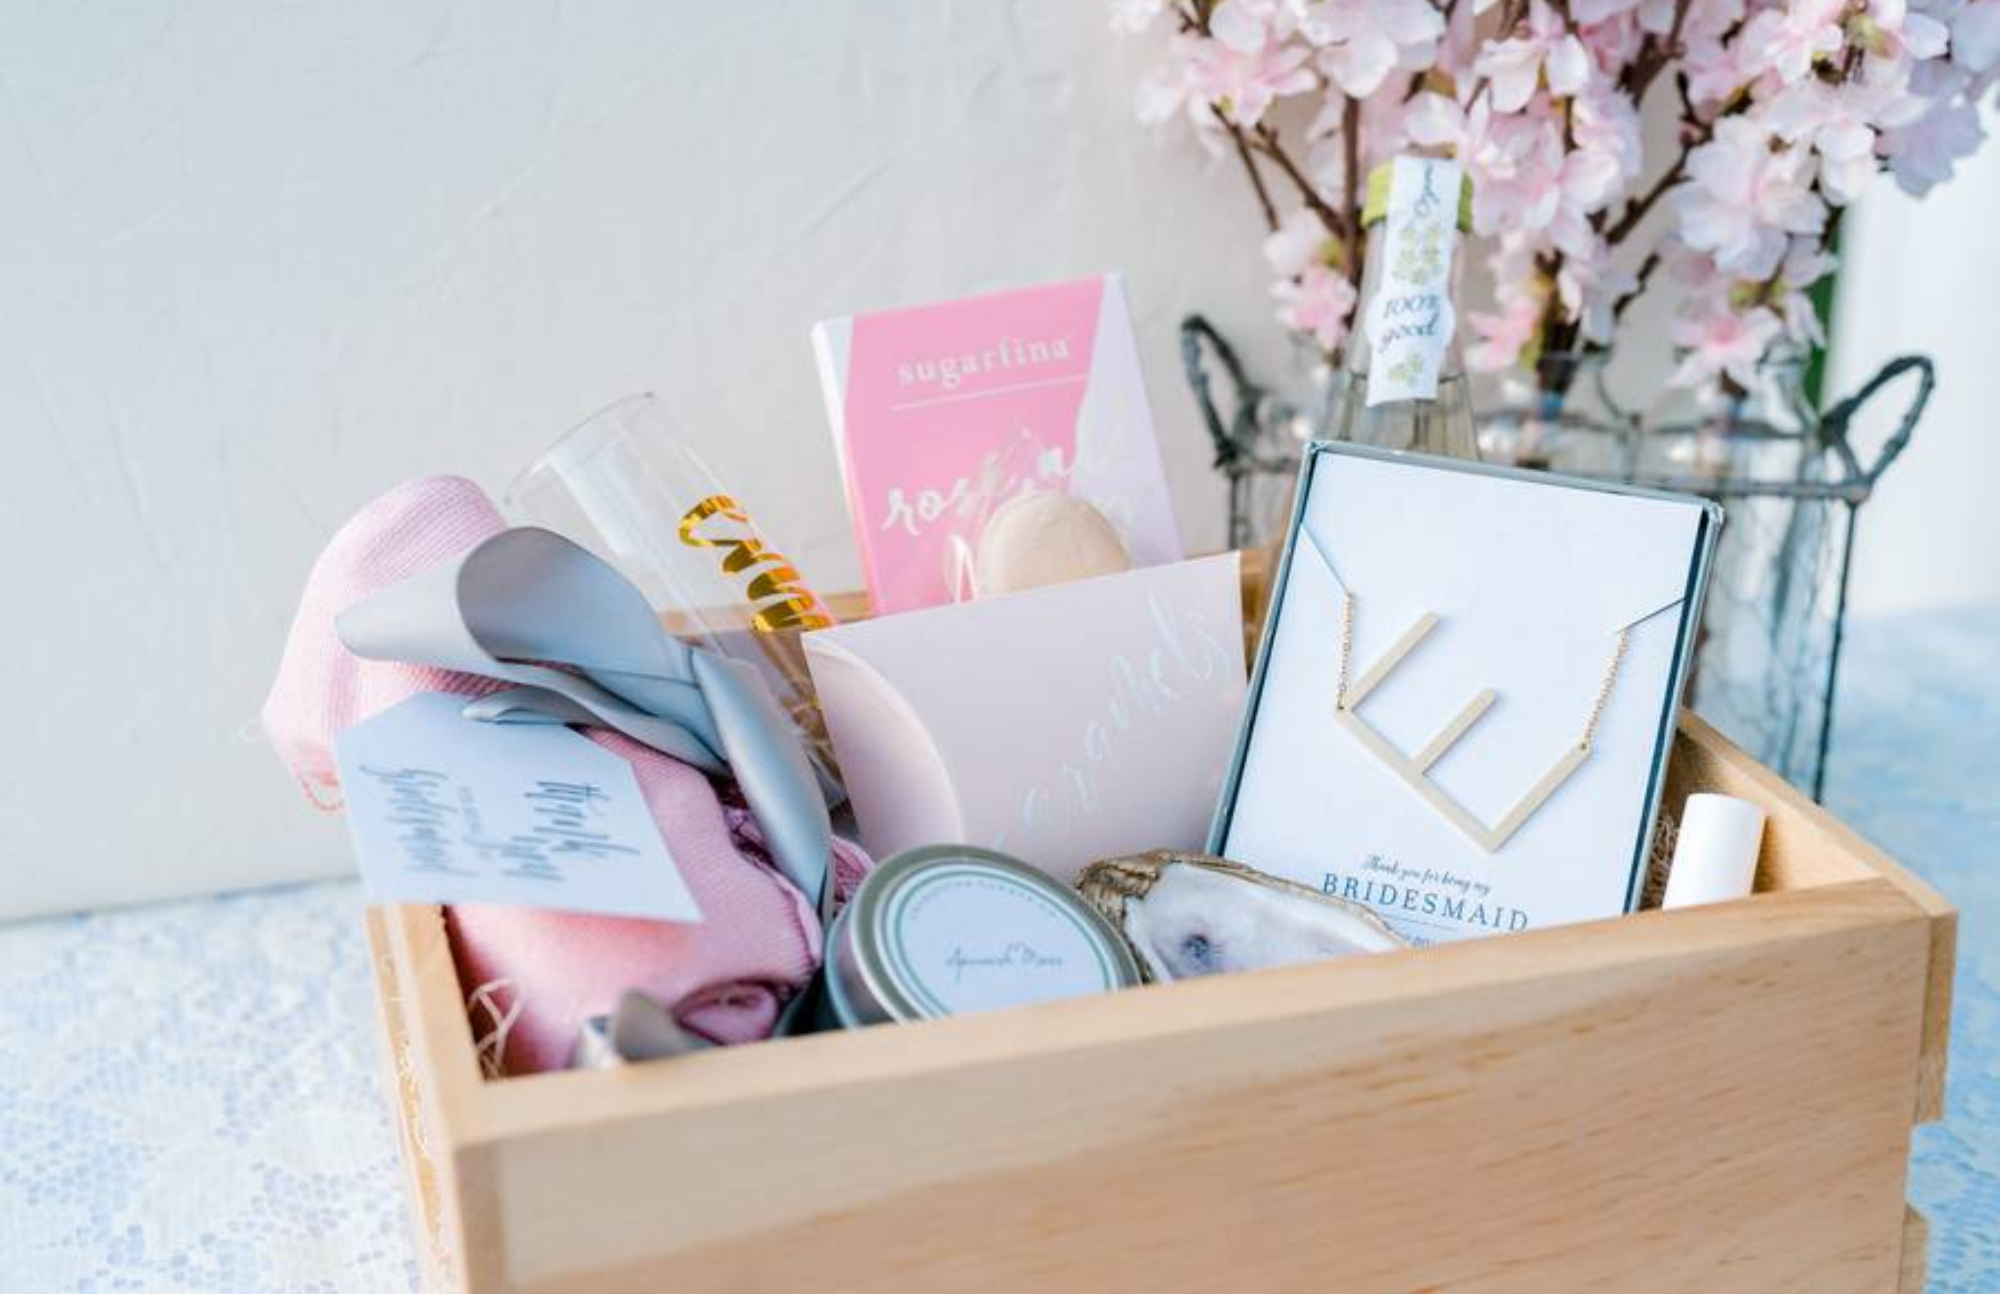 Choosing The Best Bridesmaid Gifts For Your Girls